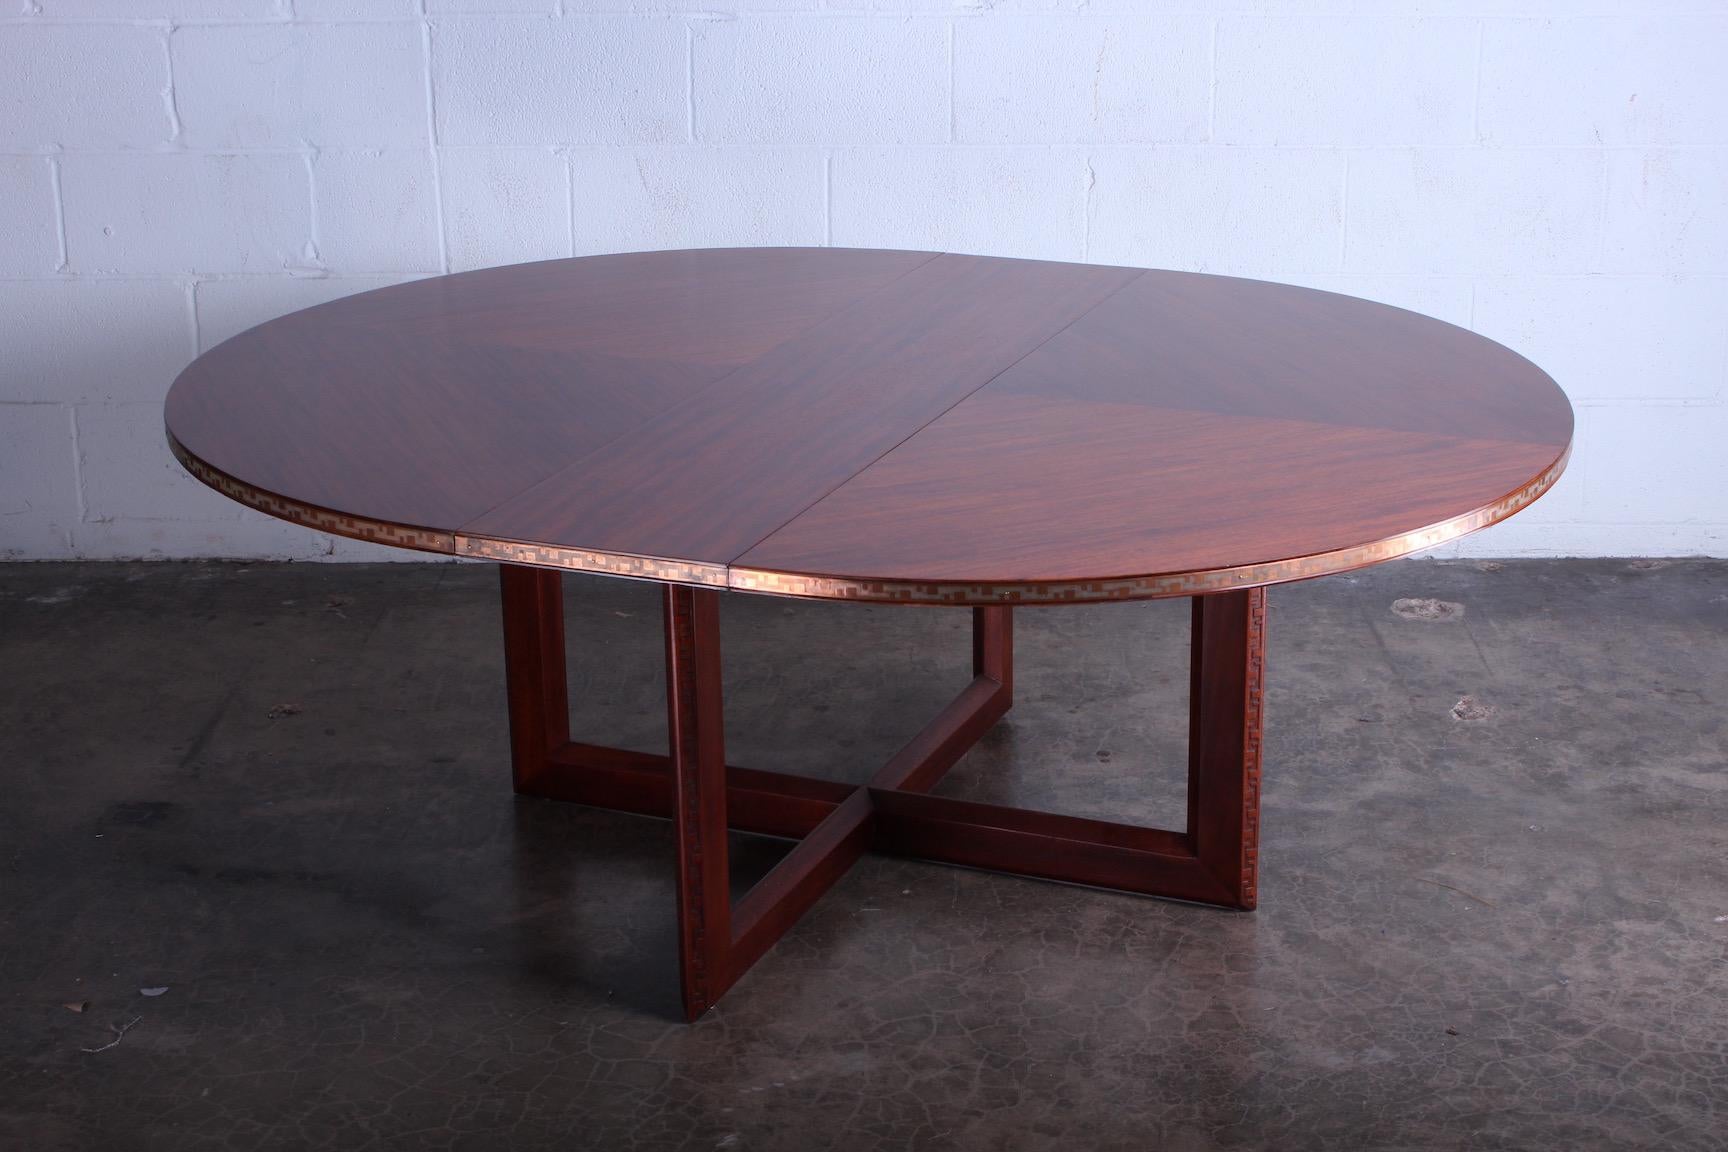 Frank Lloyd Wright for Heritage Henredon. Taliesin dining or game table. Mahogany table, concentric square pattern bookmatched with embossed copper 